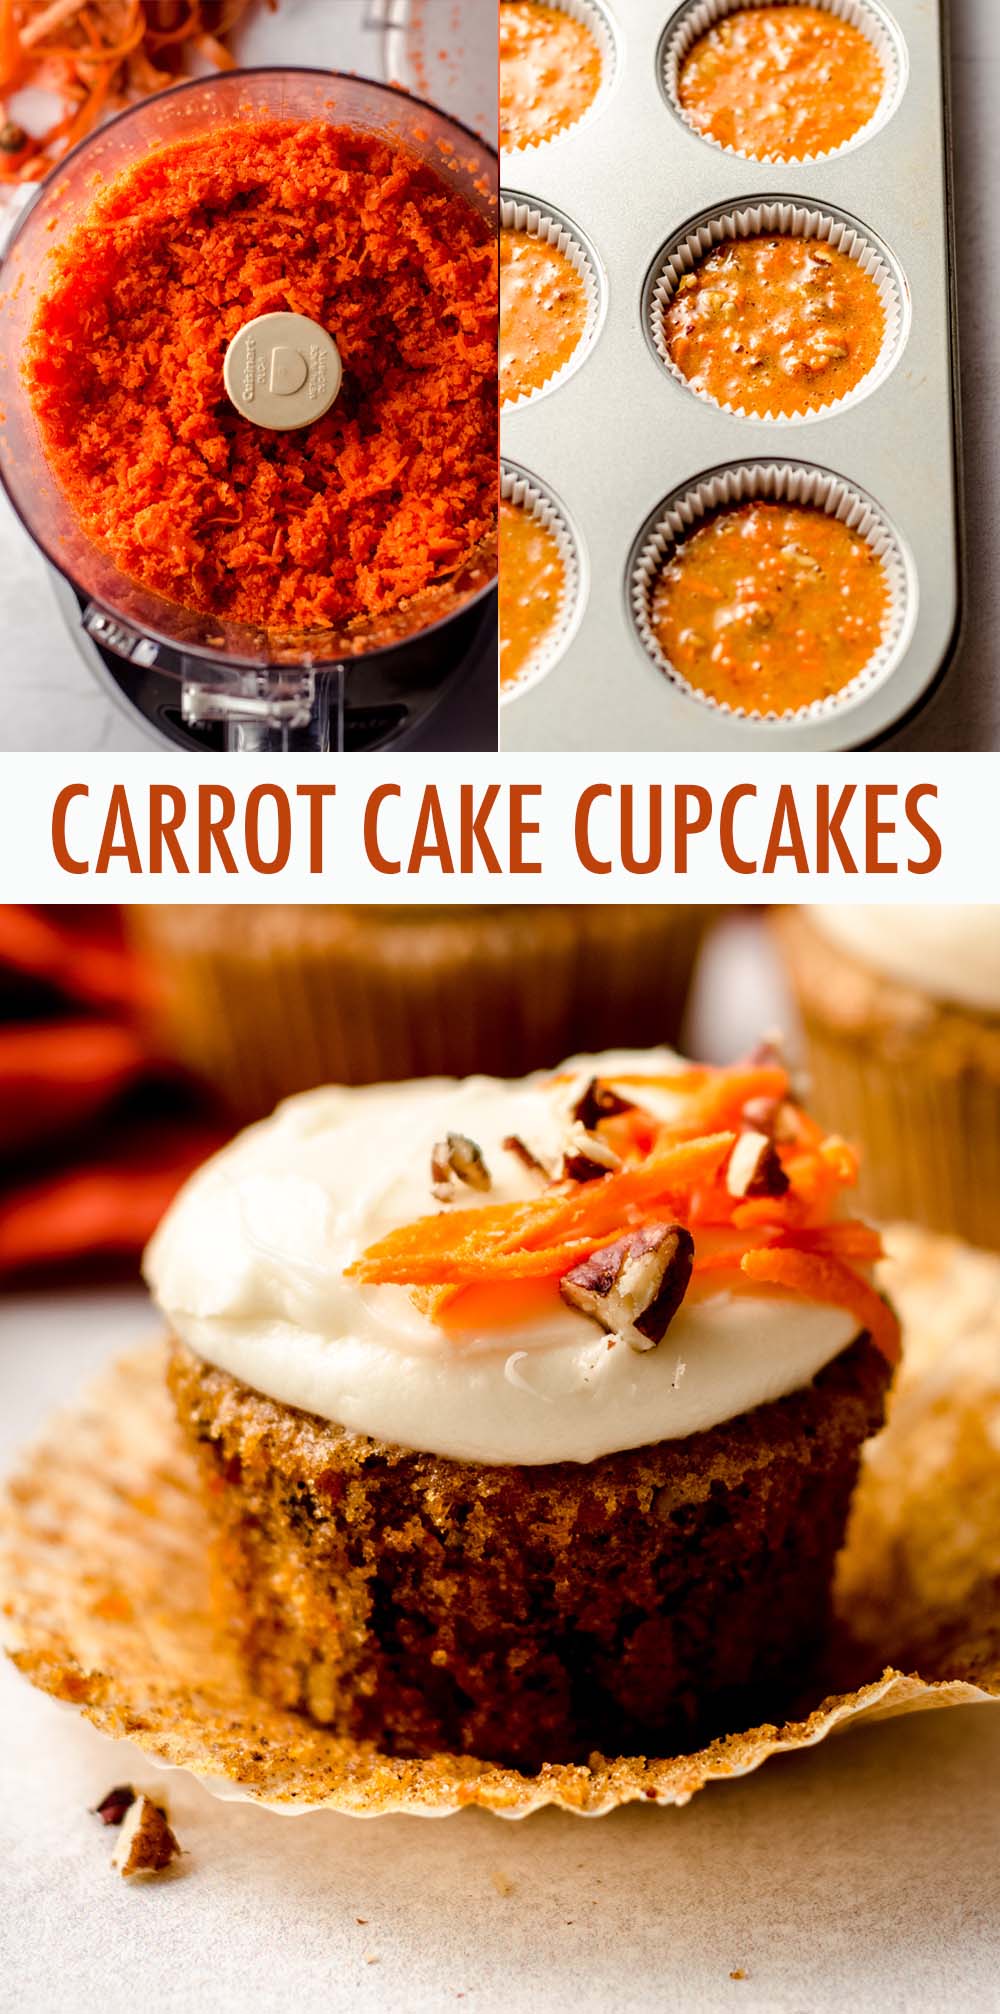 Wonderfully moist and flavorful carrot cake cupcakes filled with crunchy chopped nuts and topped with a smooth and creamy cream cheese frosting. via @frshaprilflours